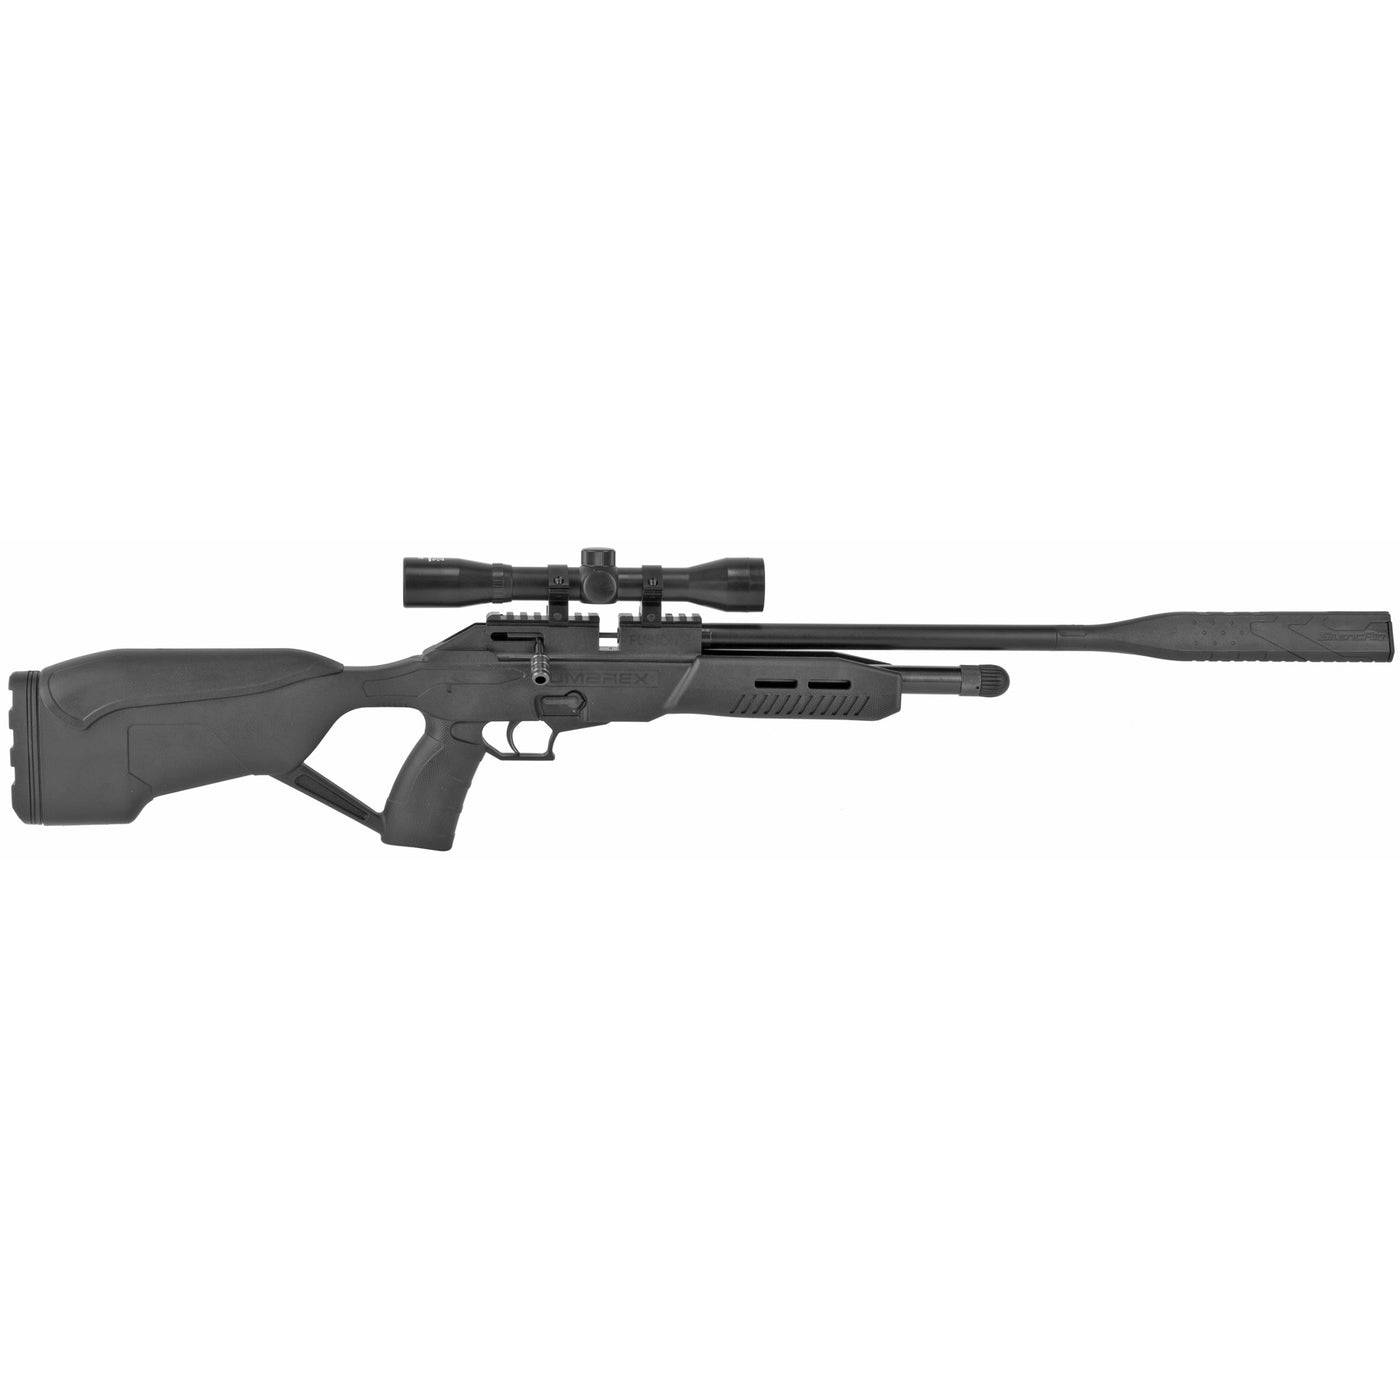 Umarex Fusion 2 Combo .177 Co2 - Air-rifle W/ 4x32mm Scope